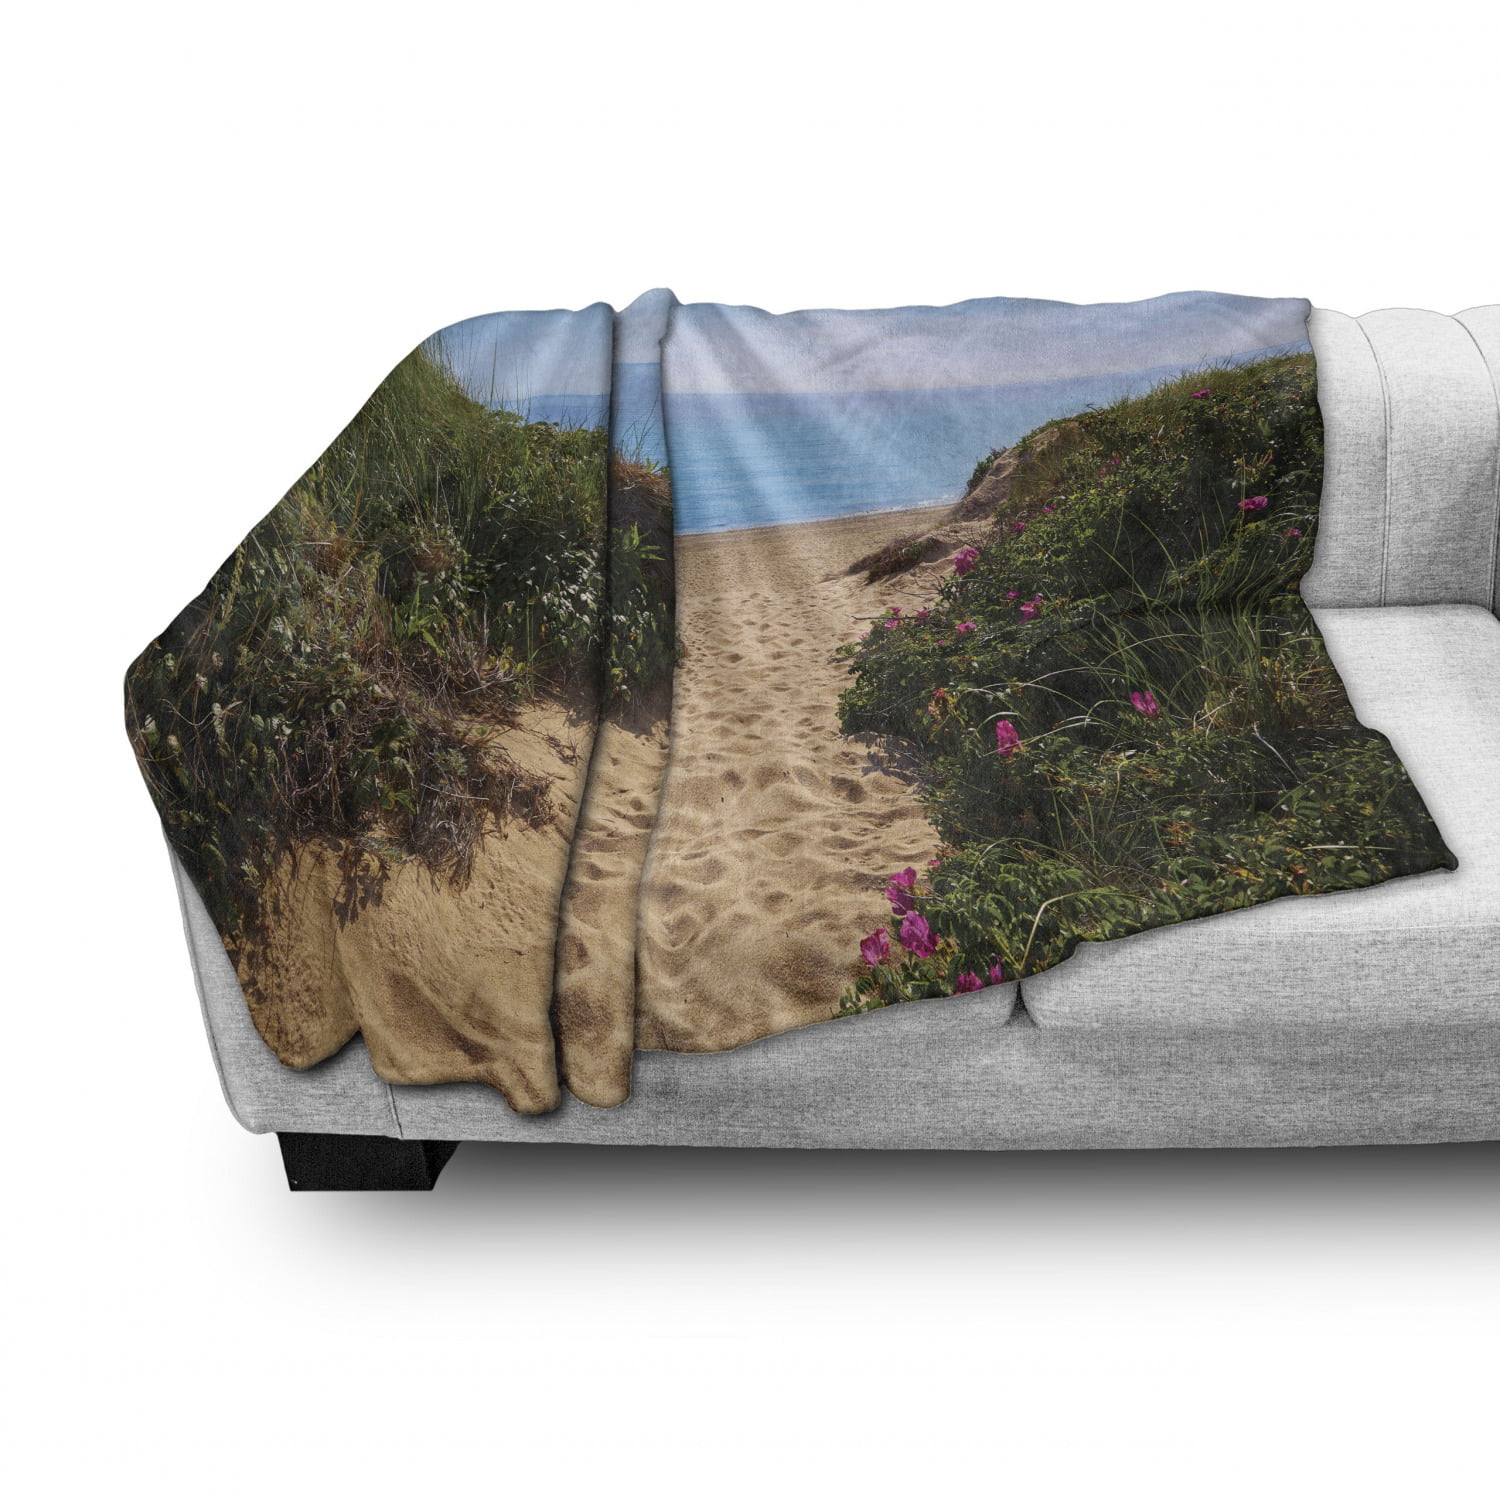 Cozy Plush for Indoor and Outdoor Use Cape Cod Herring Cove Beach in Boston United States of America Touristic 50 x 60 Multicolor Ambesonne Massachusetts Soft Flannel Fleece Throw Blanket